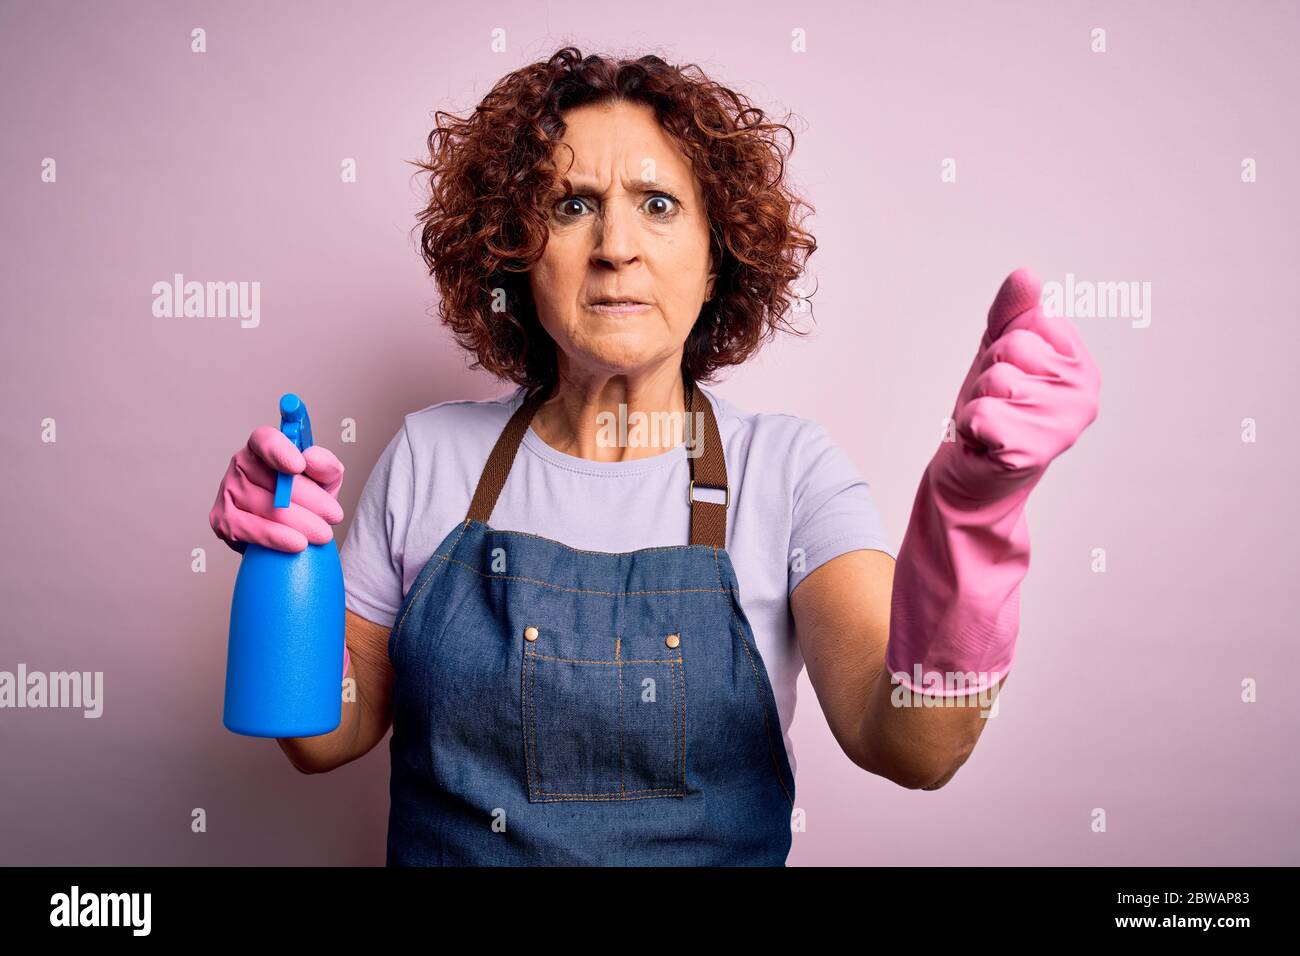 Middle age curly hair woman cleaning doing housework wearing apron and gloves using spayer annoyed and frustrated shouting with anger, crazy and yelli Stock Photo